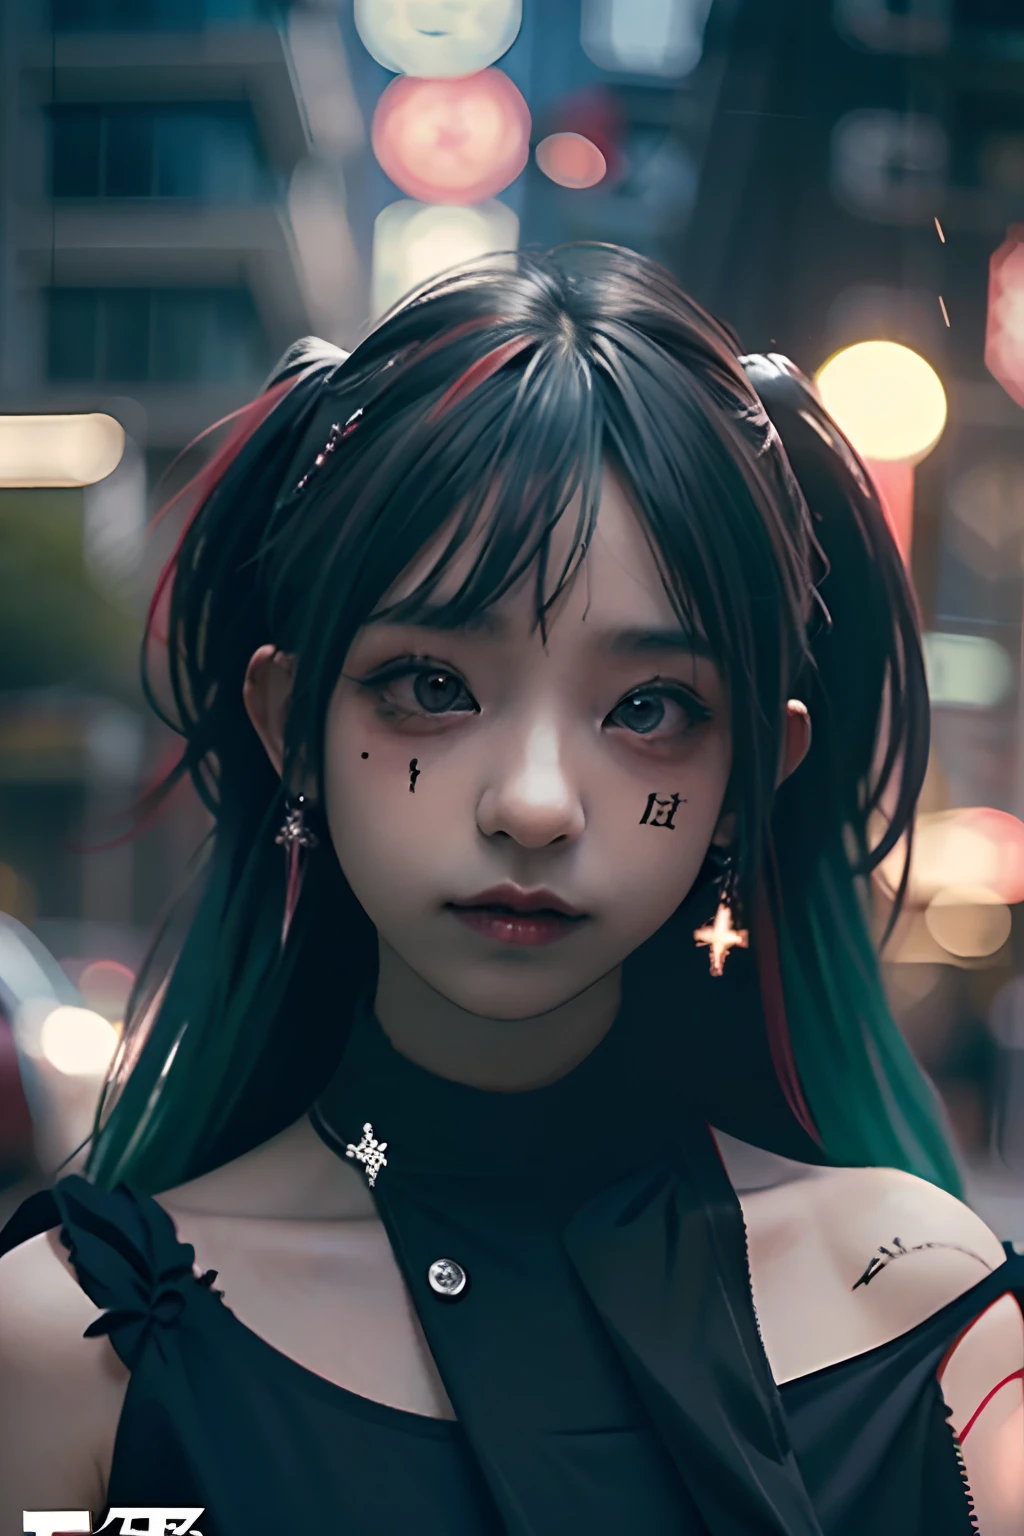 A MILF、Colossal 、Photorealsitic, hight resolution, miku hatsune、Green hair、Sleeveless、The tattoo、head phone、🎧、goth_punk, 1girl in, solo, Walking in Harajuku, ((during night)), bokeh dof, Neon light, Iridescent eyes, starrysky, red glowing hair, Black eyebrows, Radiant hair, (iridescent red hair), 耳Nipple Ring, bangss, jewely,, bluntbangs, verd s eyes, blurry backround, bblurry, hair adornments, Look at viewers, shorth hair, portraitures, side locks